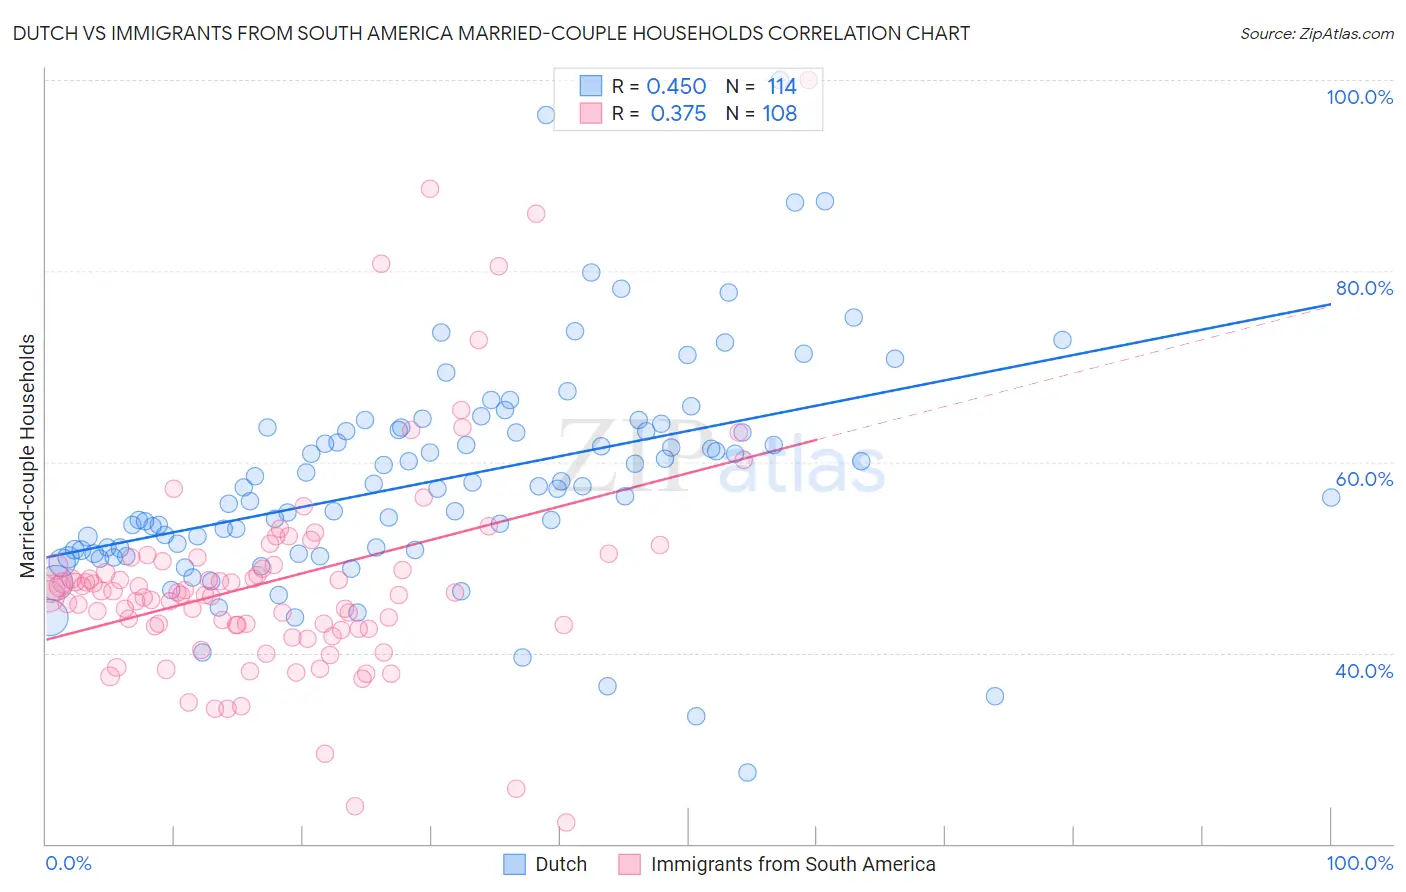 Dutch vs Immigrants from South America Married-couple Households